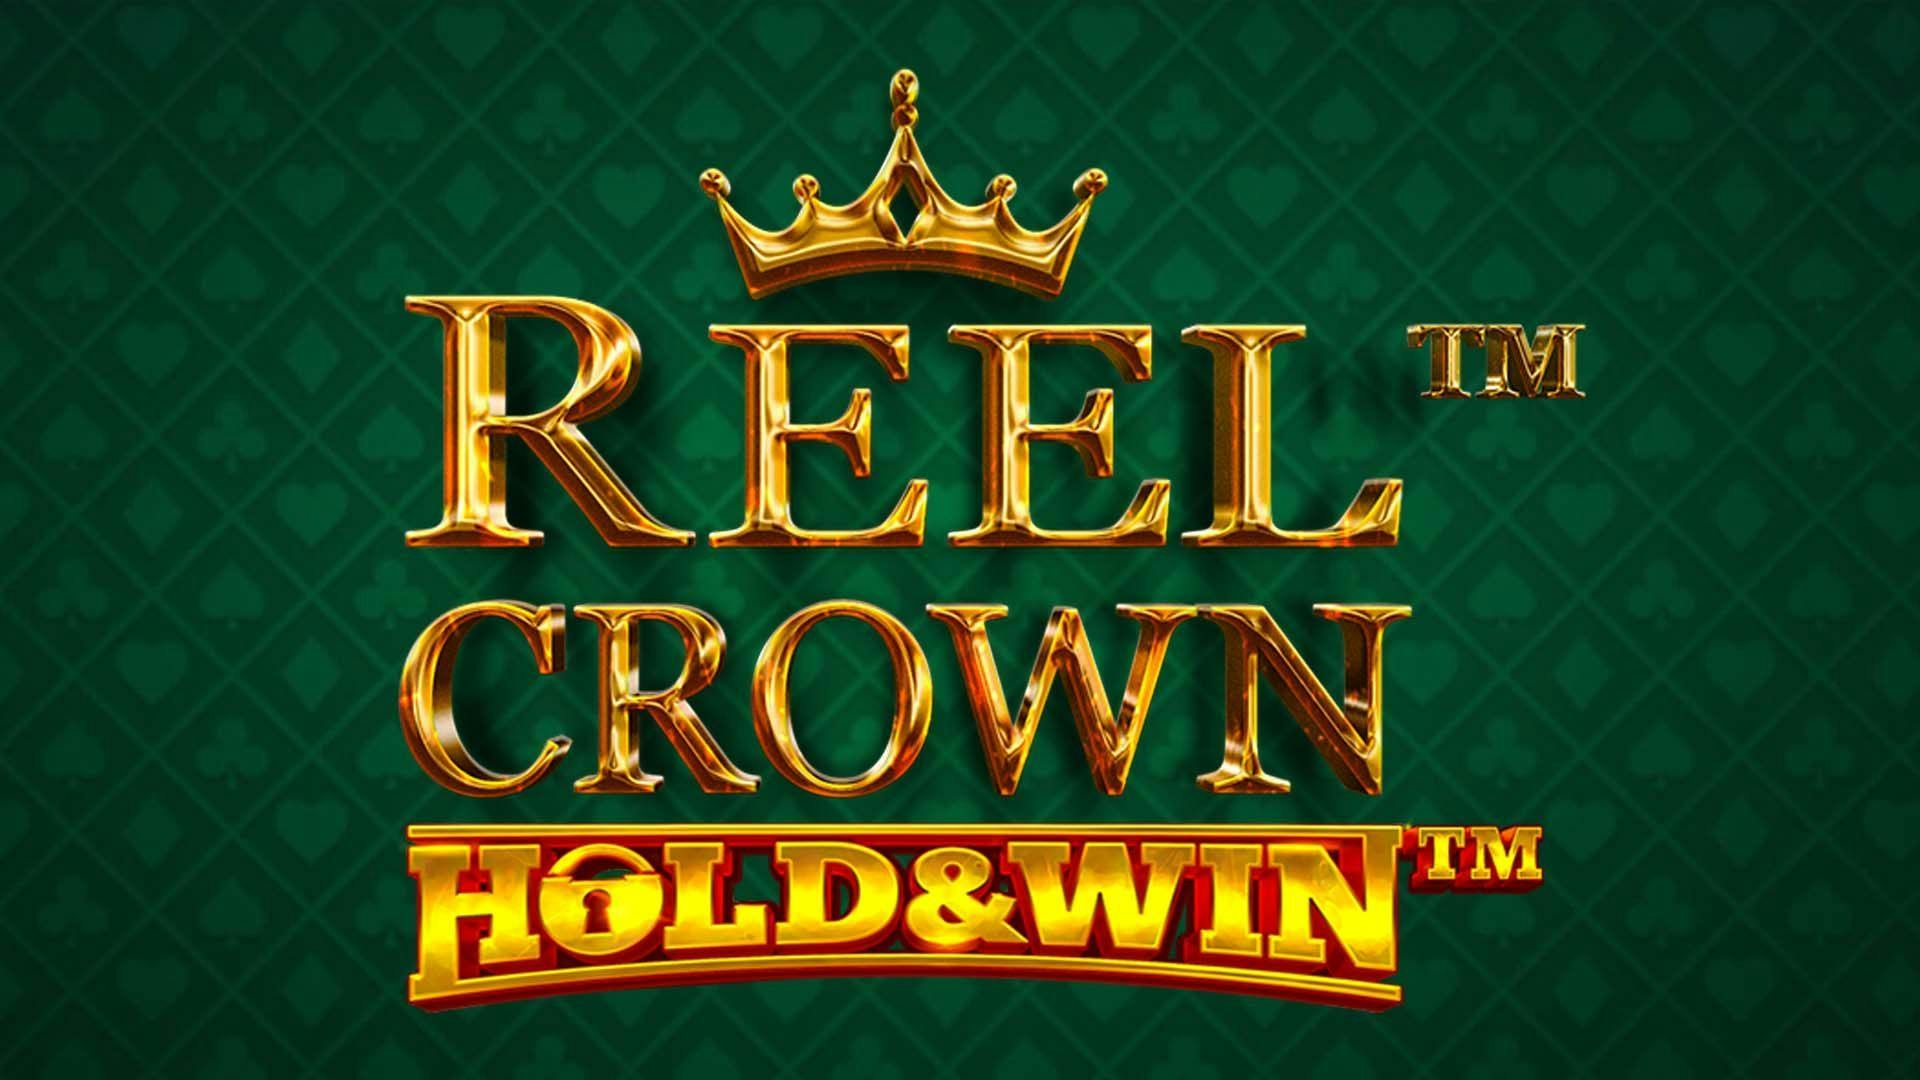 Reel Crown Hold & Win Slot Machine Online Free Game Play